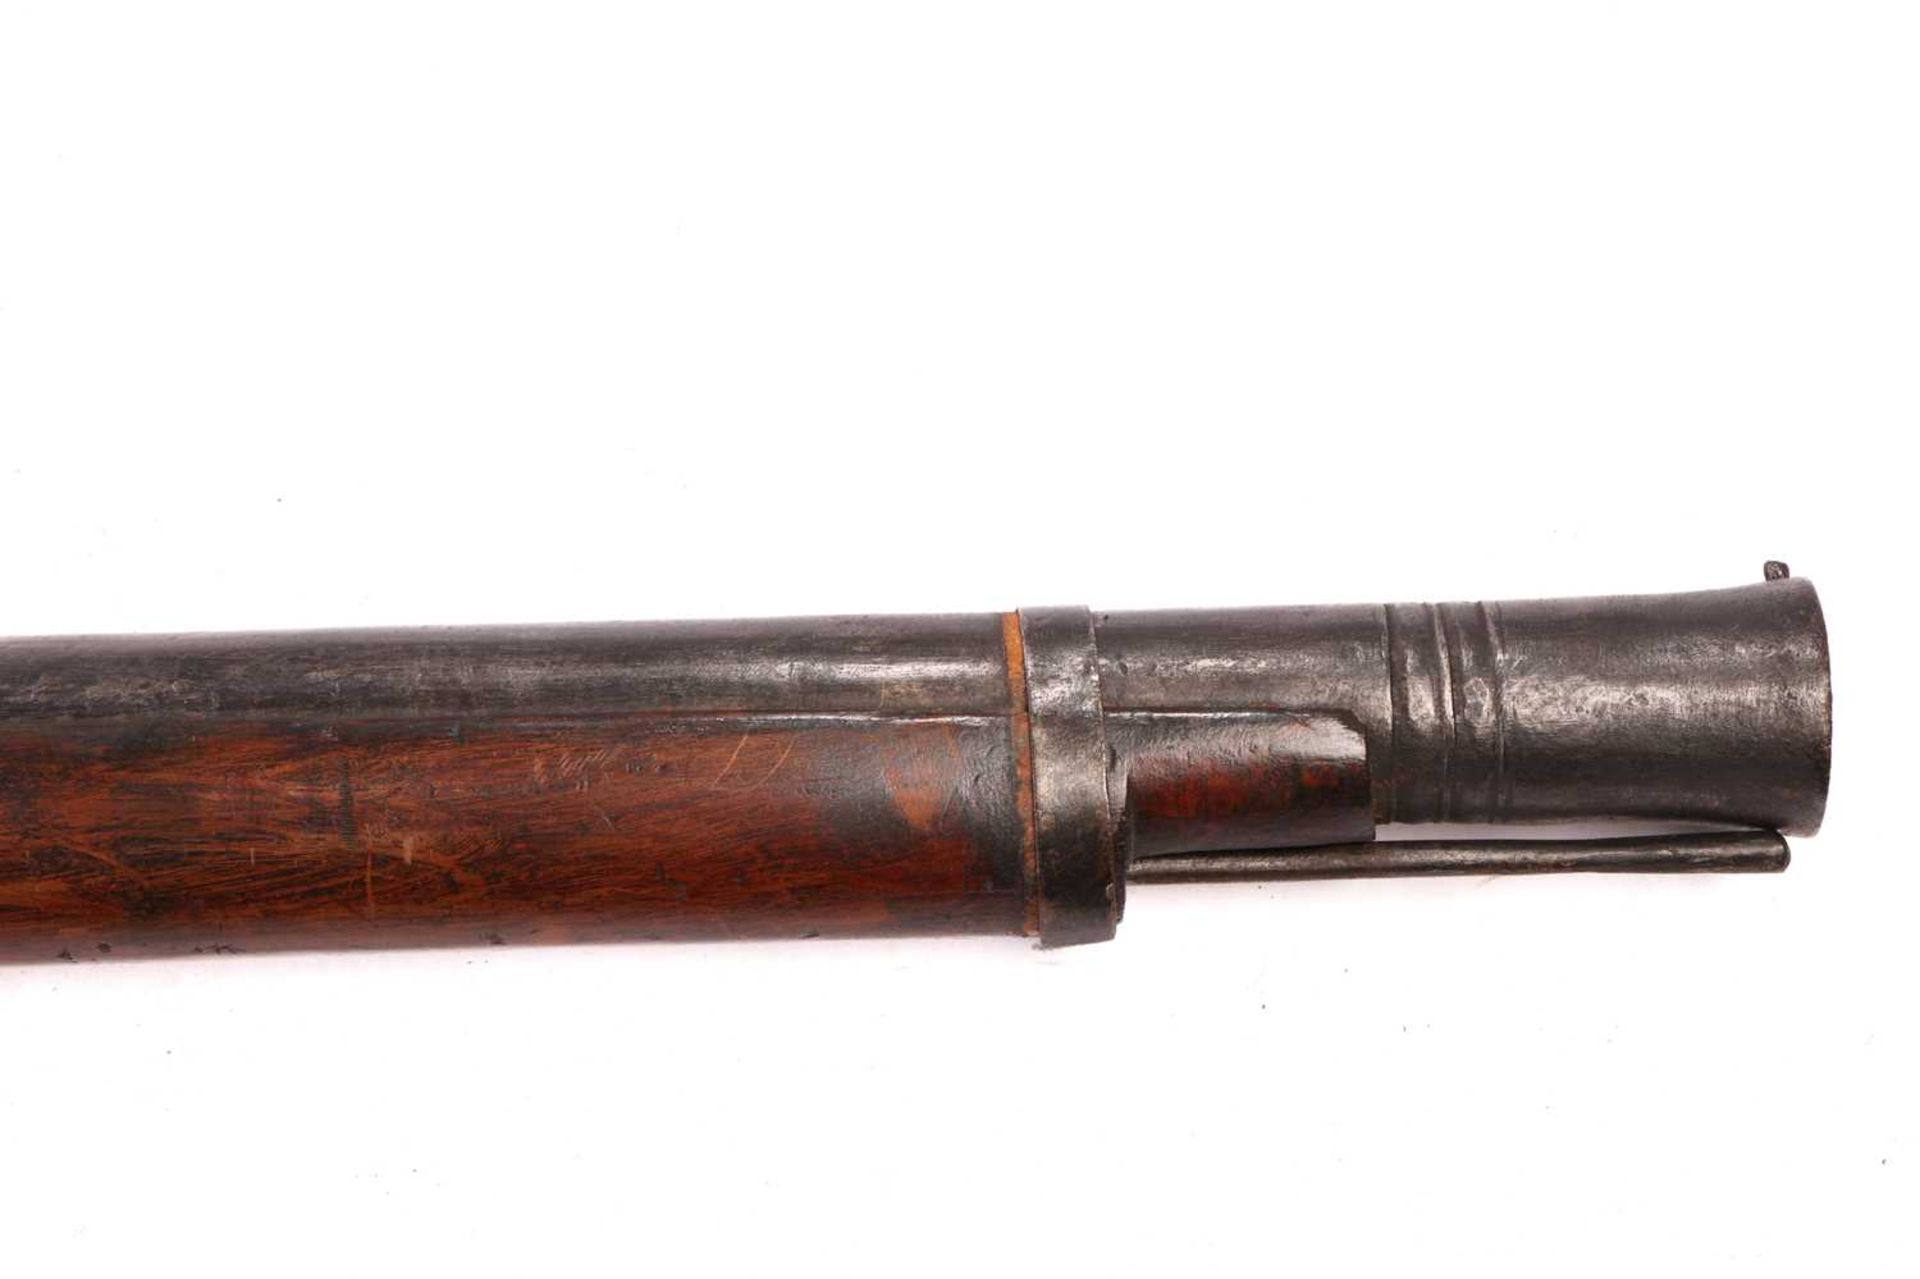 A huge 1-inch bore Indian Toradar matchlock (rampart gun), 19th century, with a forged iron barrel t - Image 4 of 8